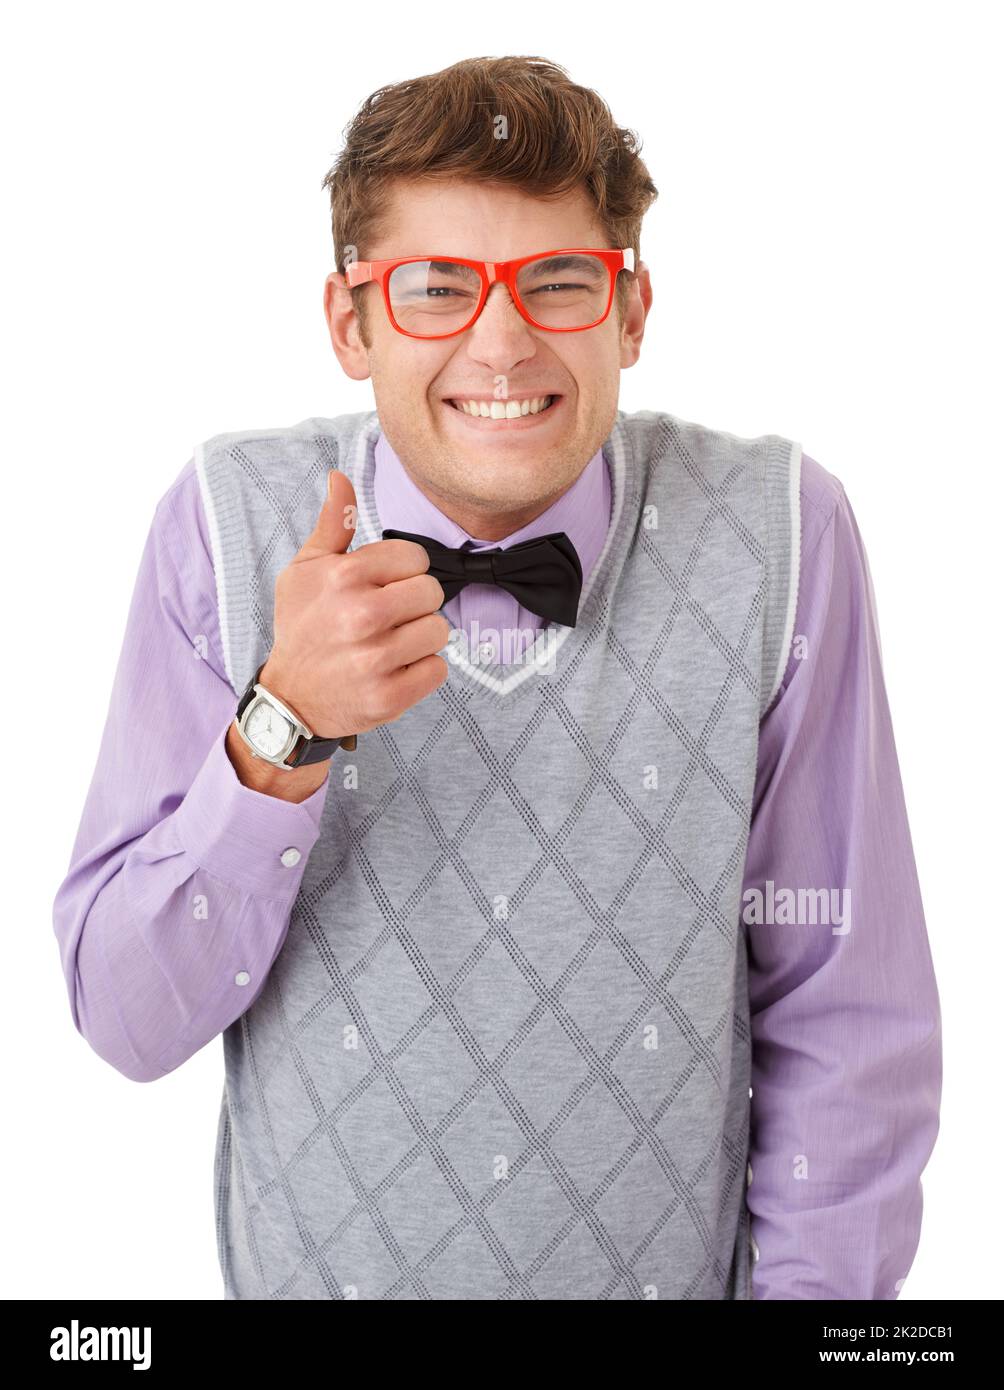 heres-an-enthusiastic-thumbs-up-studio-portrait-of-a-nerdy-young-man-giving-the-thumbs-up-to-the-camera-2K2DCB1.jpg